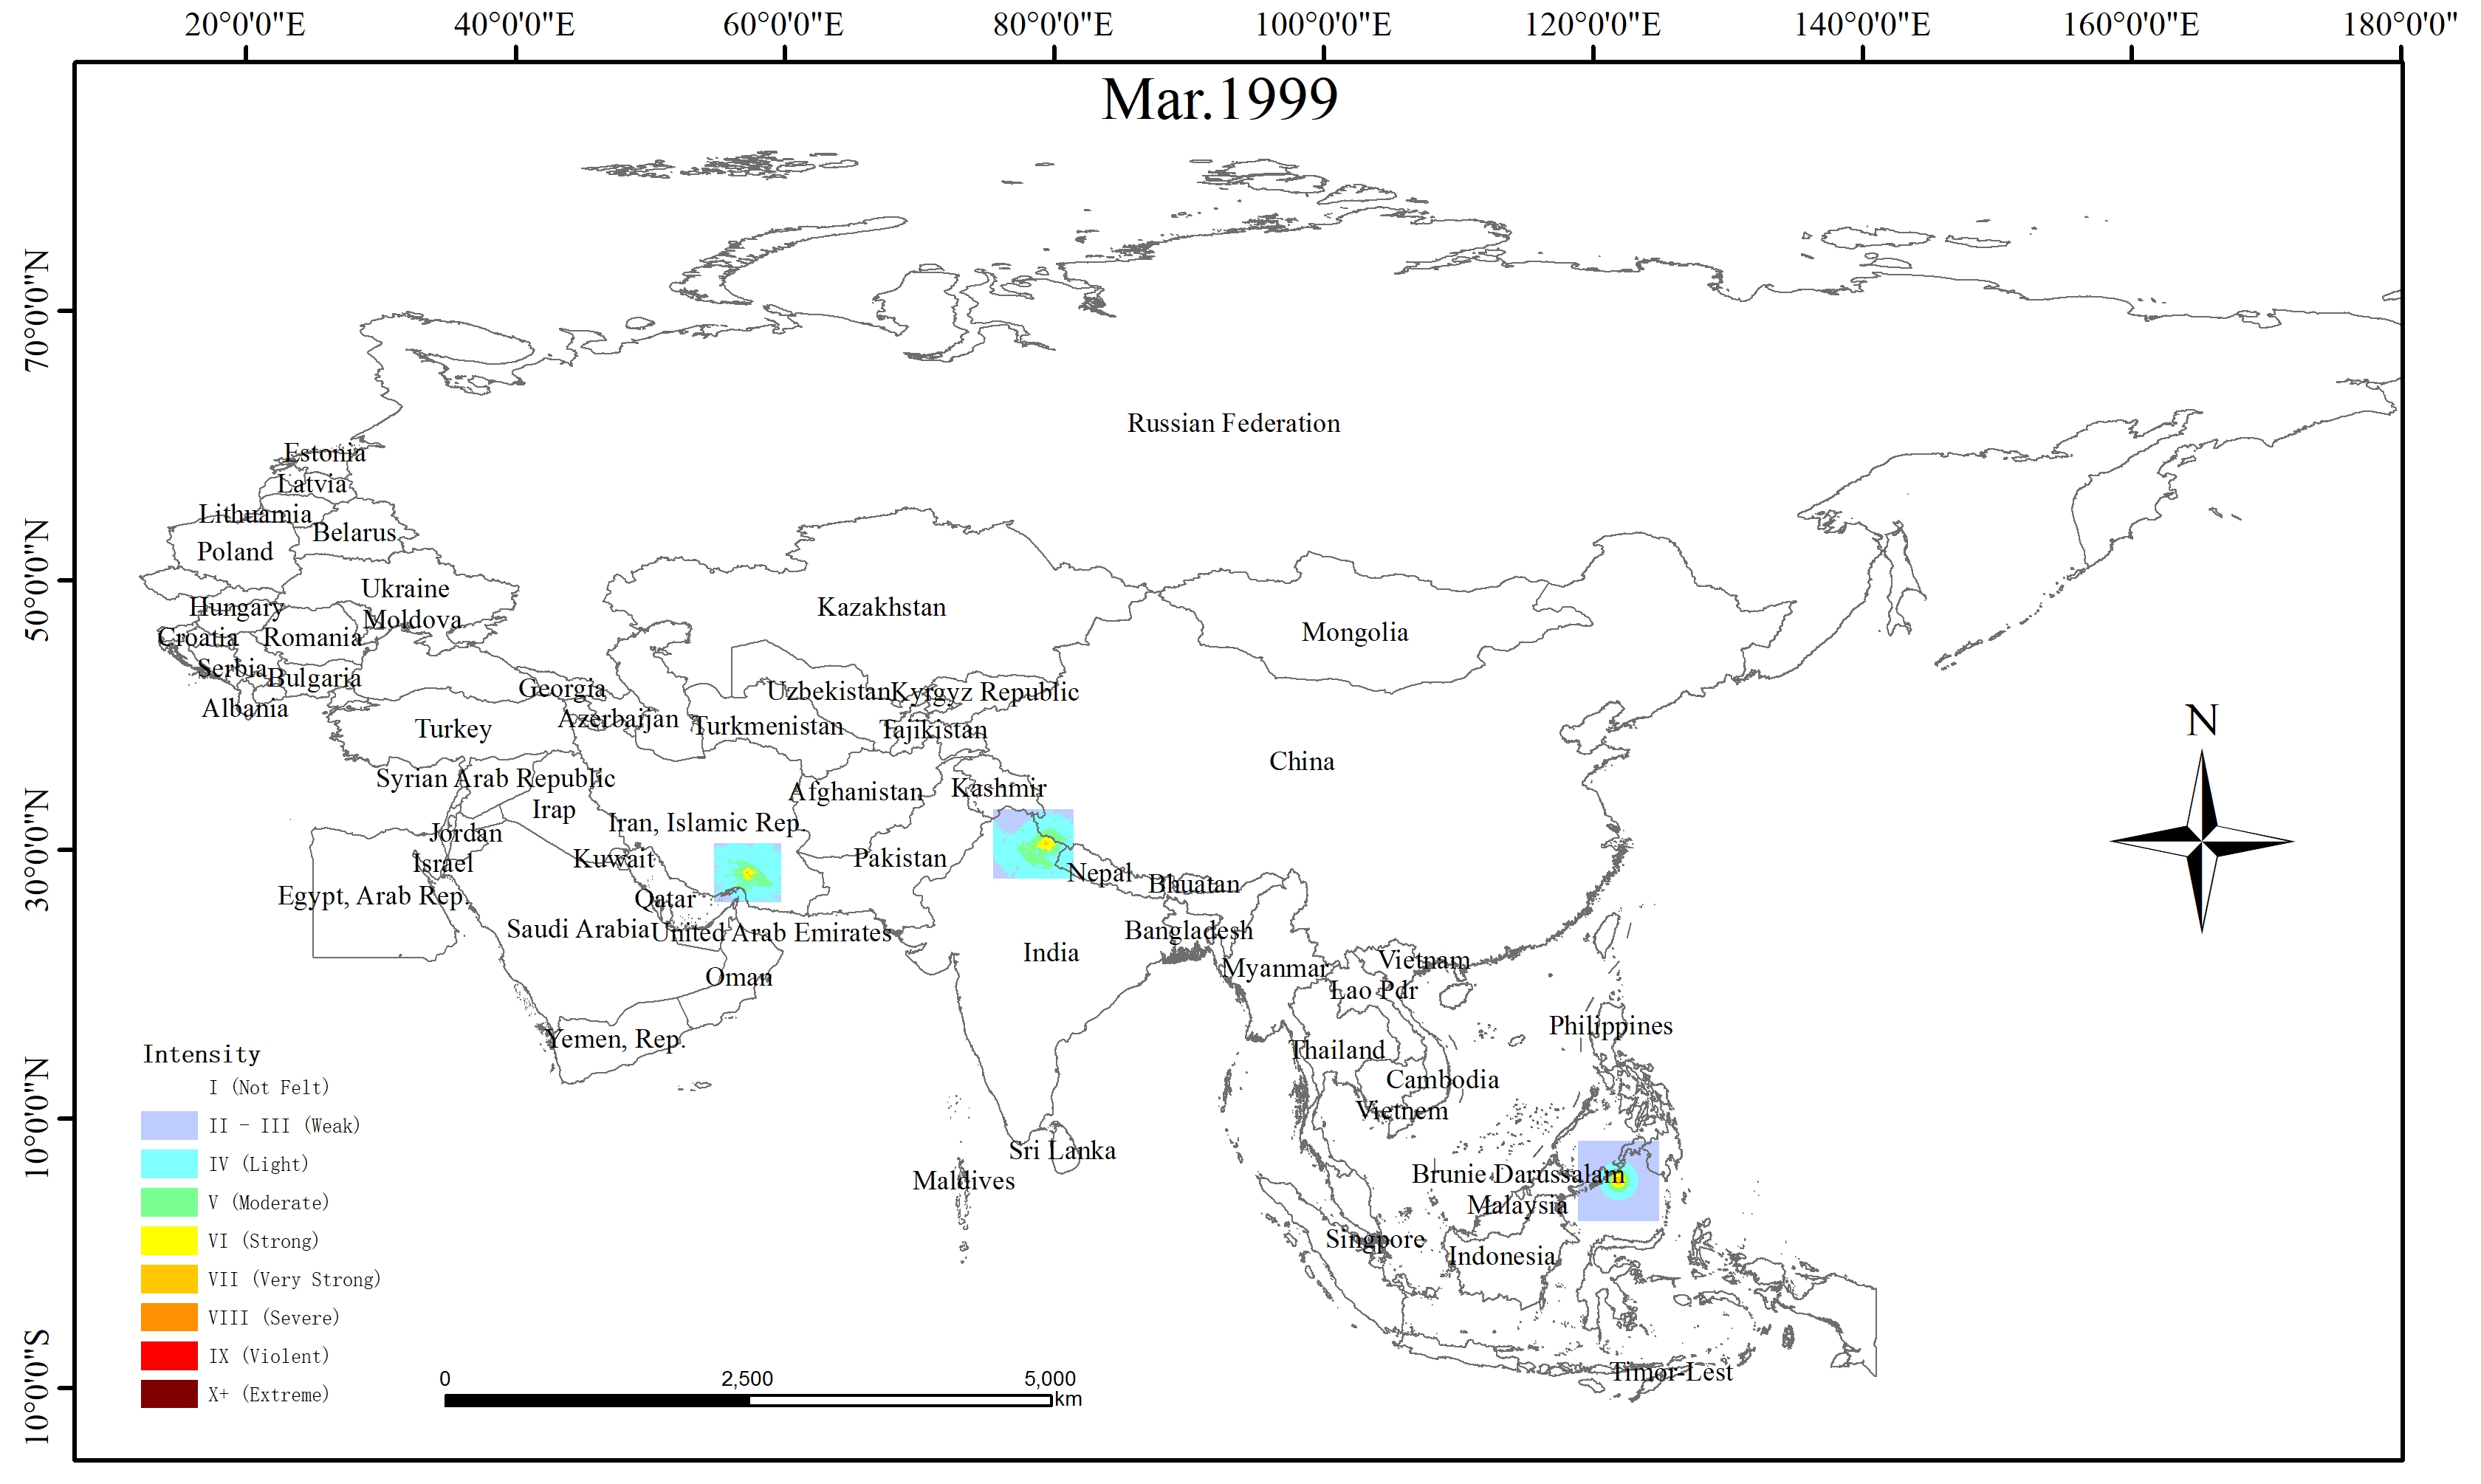 Spatio-temporal Distribution of Earthquake Disaster in the Belt and Road Area in 1999